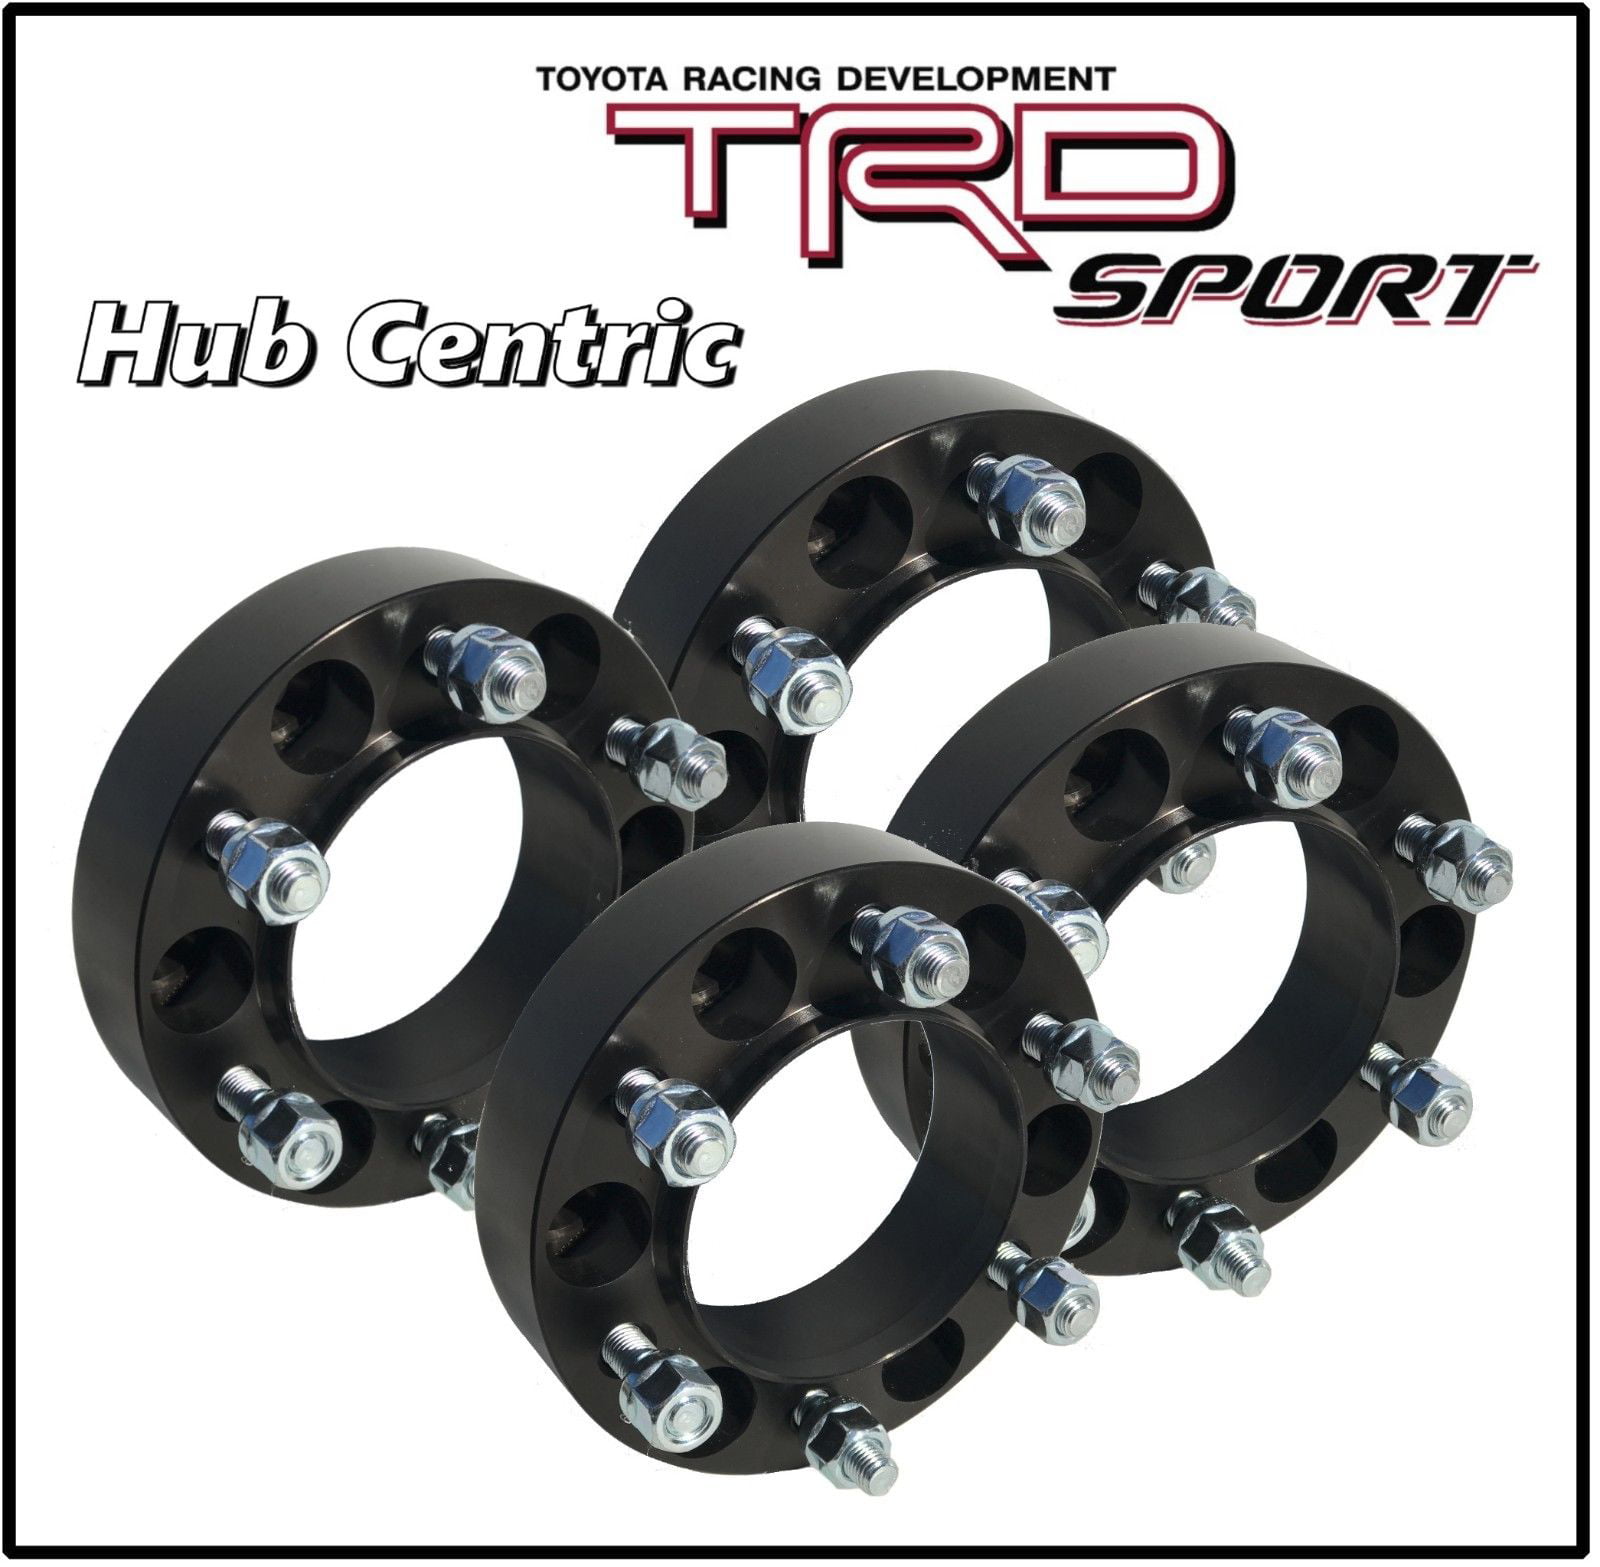 4 Pc Toyota 1.25" Thick Hub Centric Wheel Spacers Tacoma Tundra 4 Runner Black